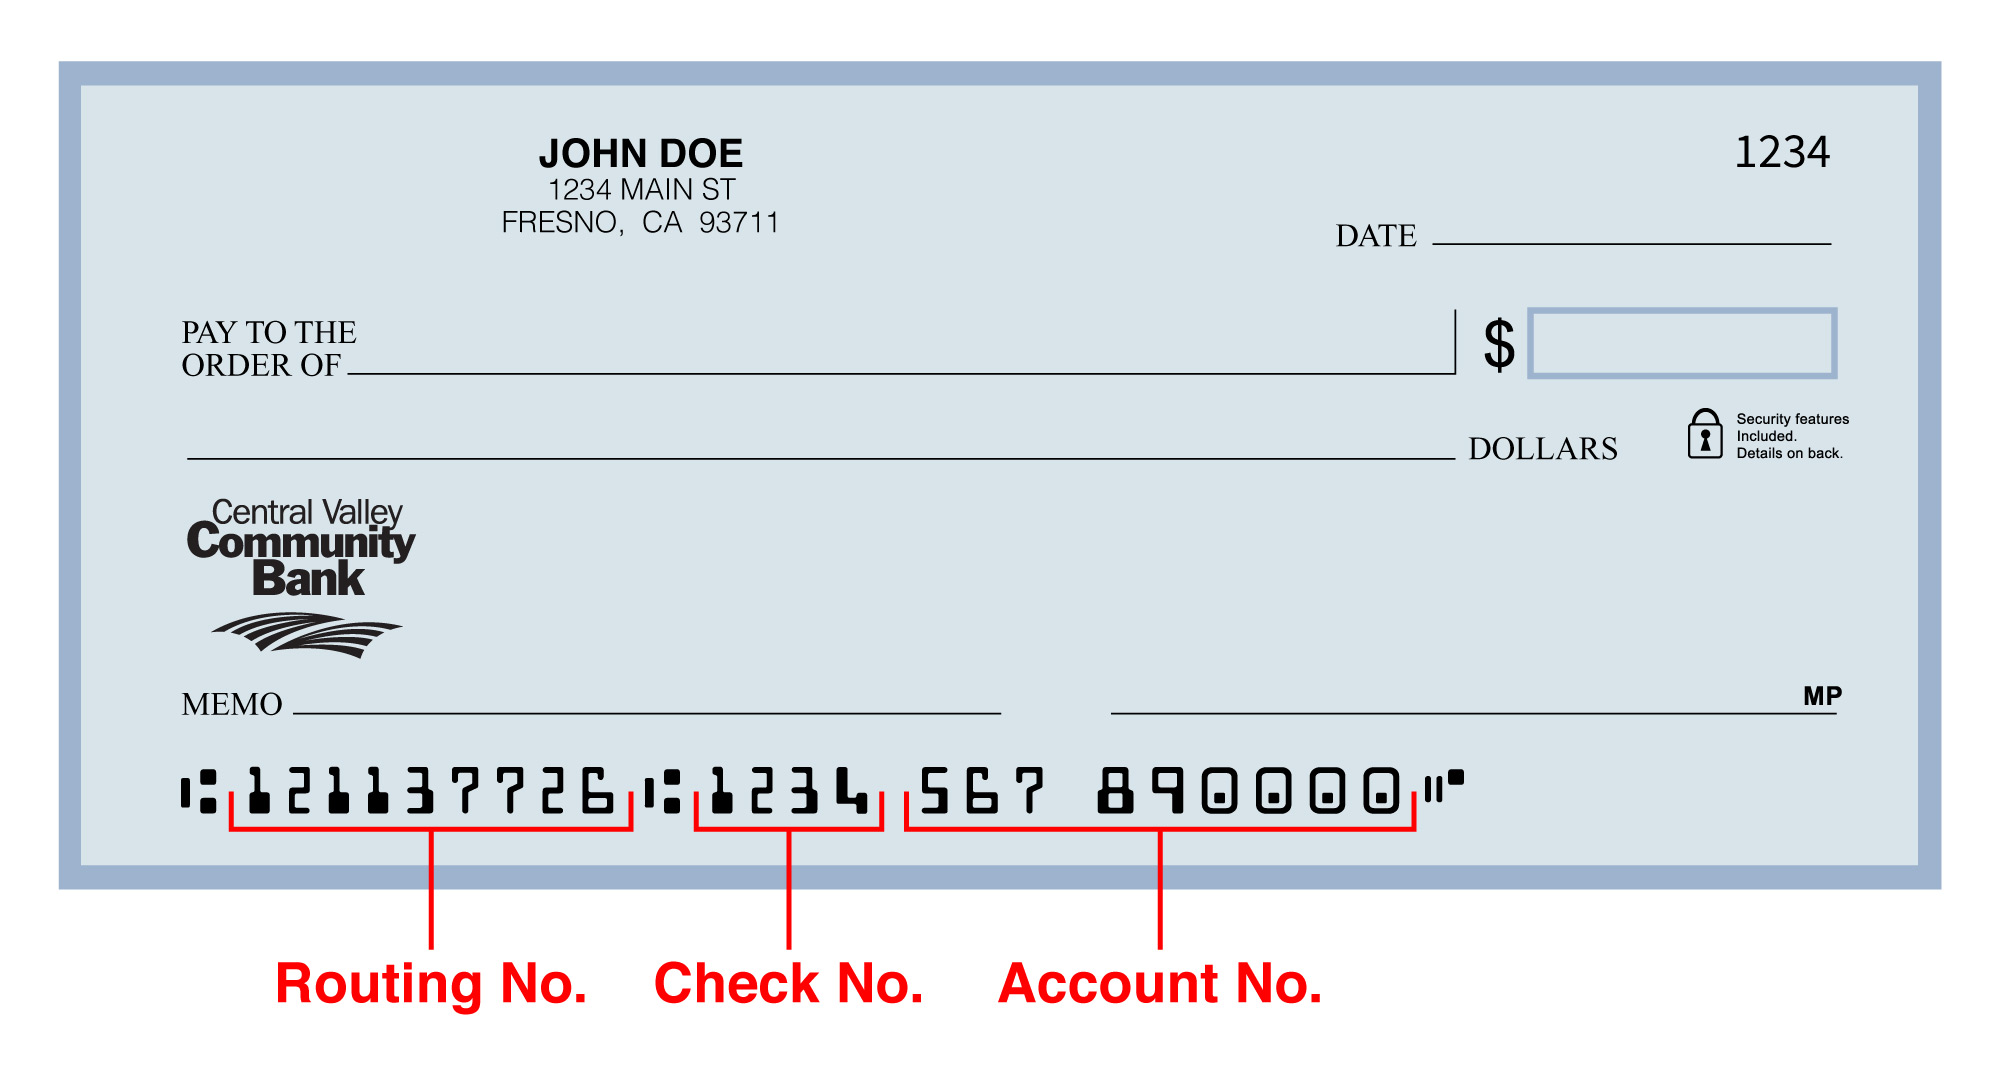 what is the checking routing number